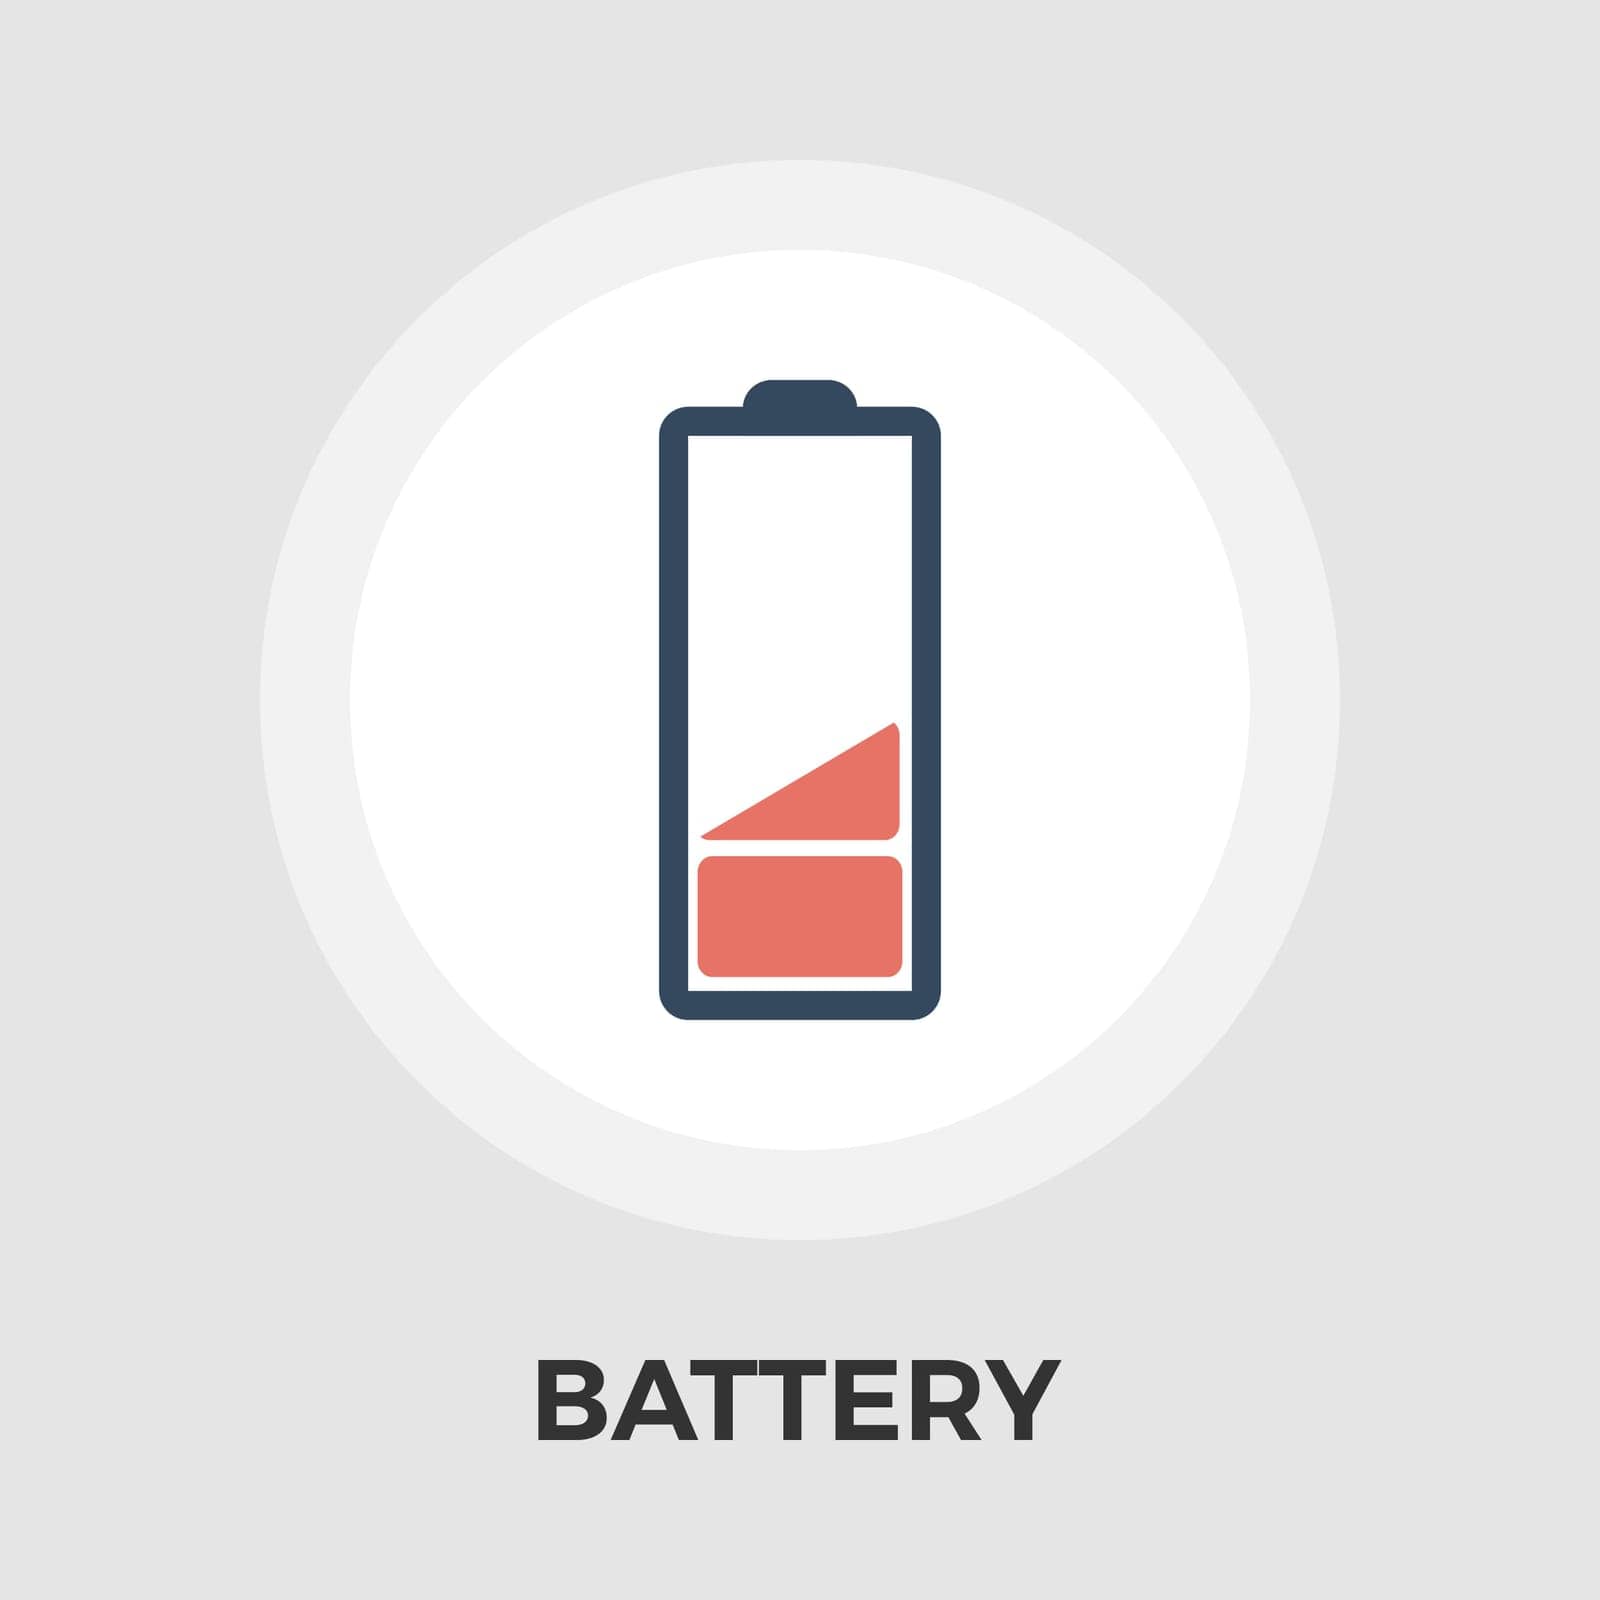 Battery Icon Vector. Flat icon isolated on the white background. Editable EPS file. Vector illustration.